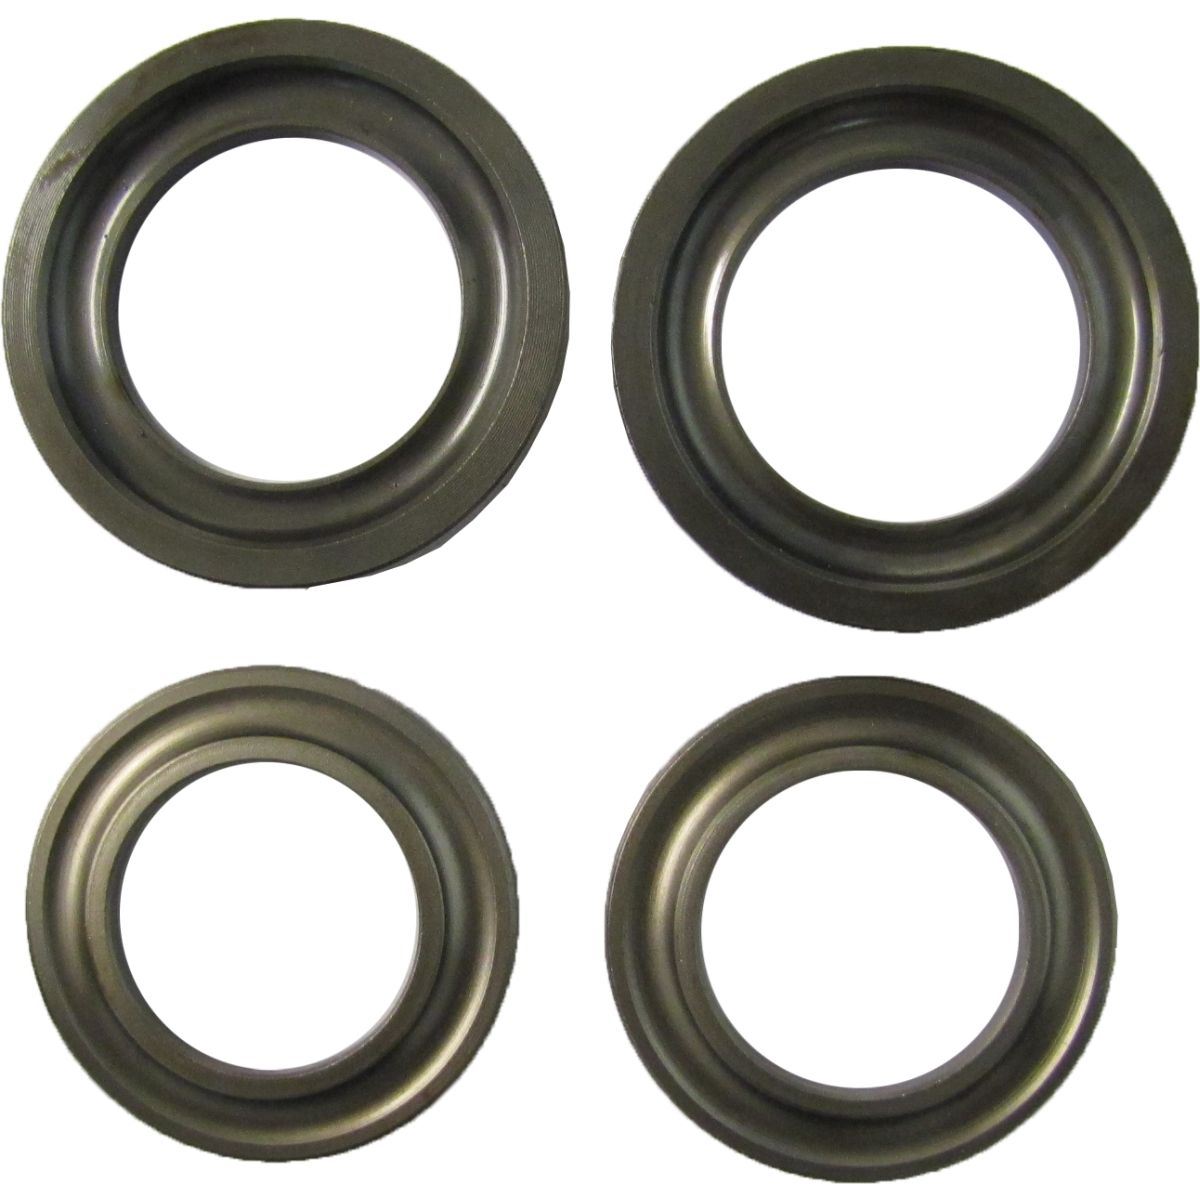 TOPROL 386A/382A Inch Taper Roller Bearing Cup/Cone Set Same Day Shipping!